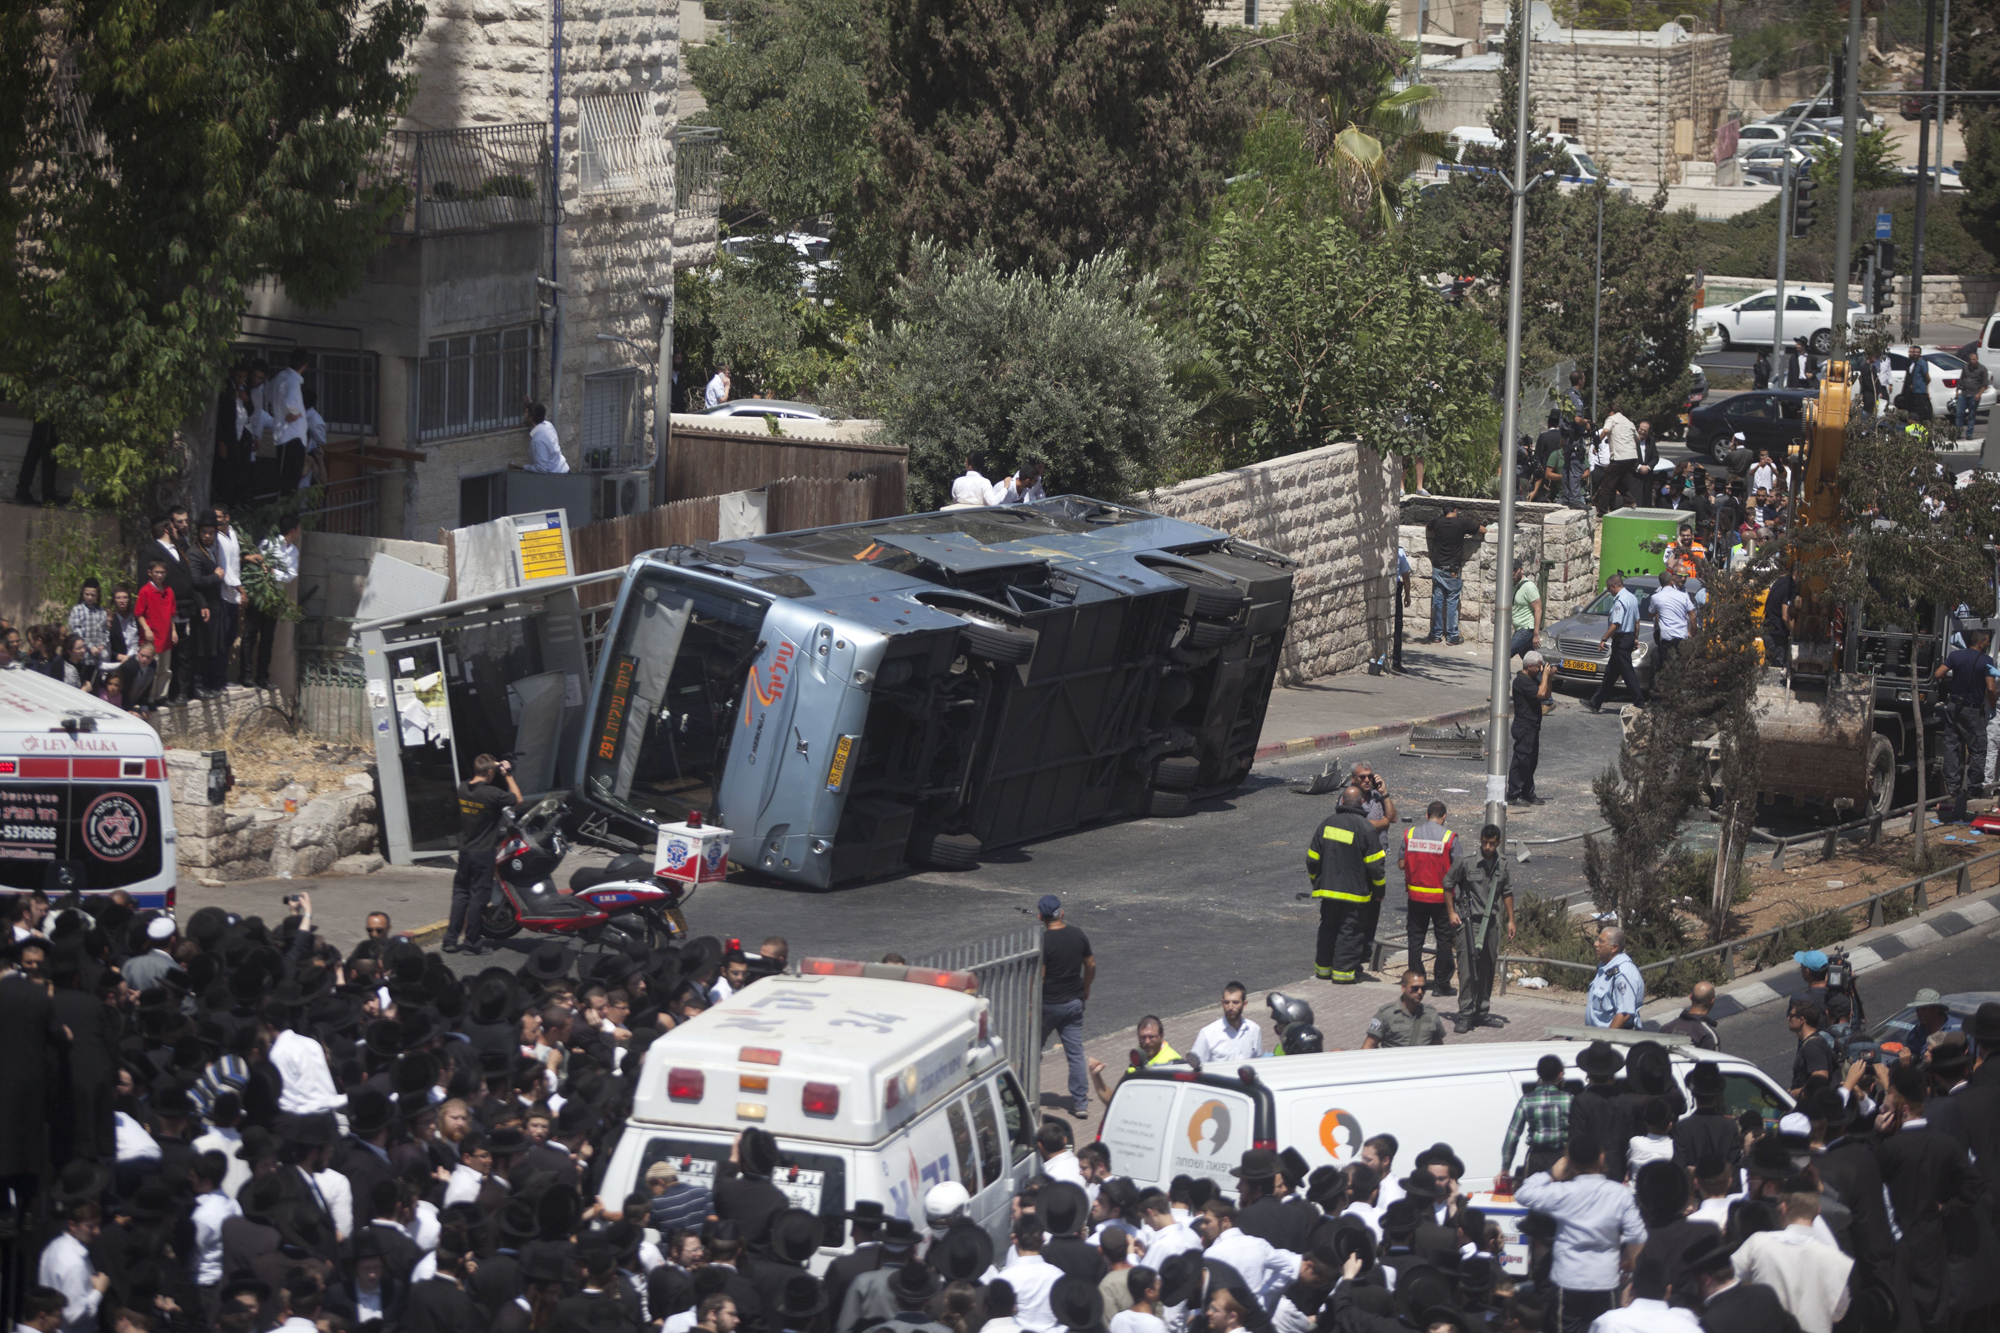 A bus after a Palestinian man in an excavator into it on Aug. 4. 2014 in Jerusalem.